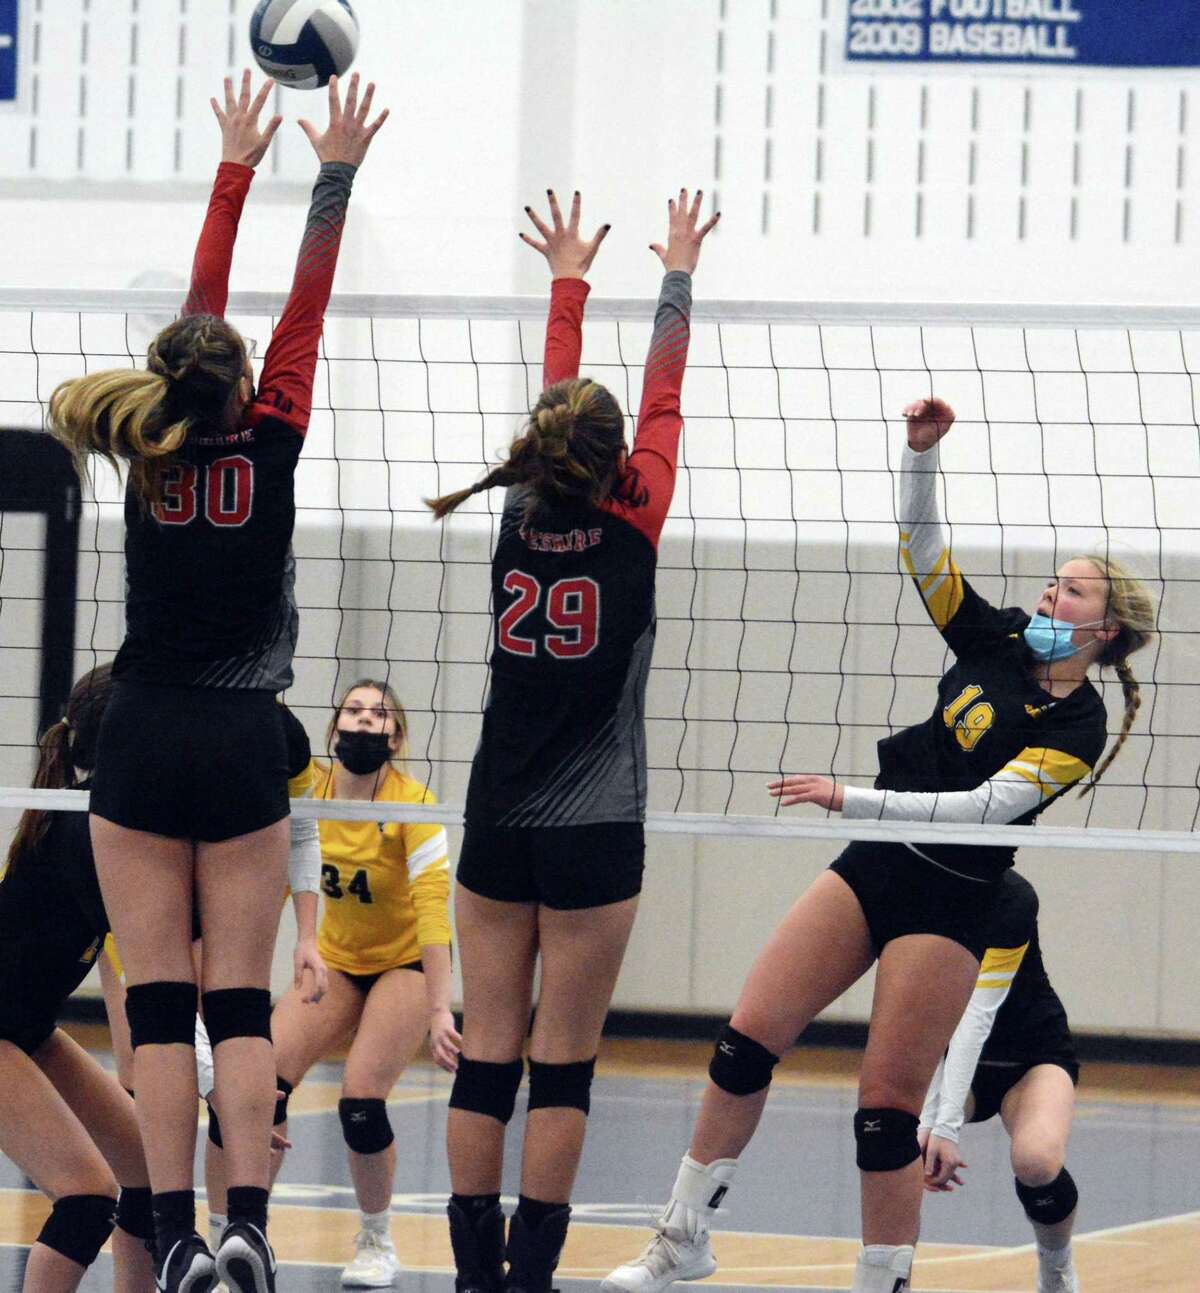 Cheshire’s Eva Catalonotto (30) blocks a shot by Amity’s Mya DiZenzo in the SCC girls’ volleyball championship game Saturday night in West Haven.